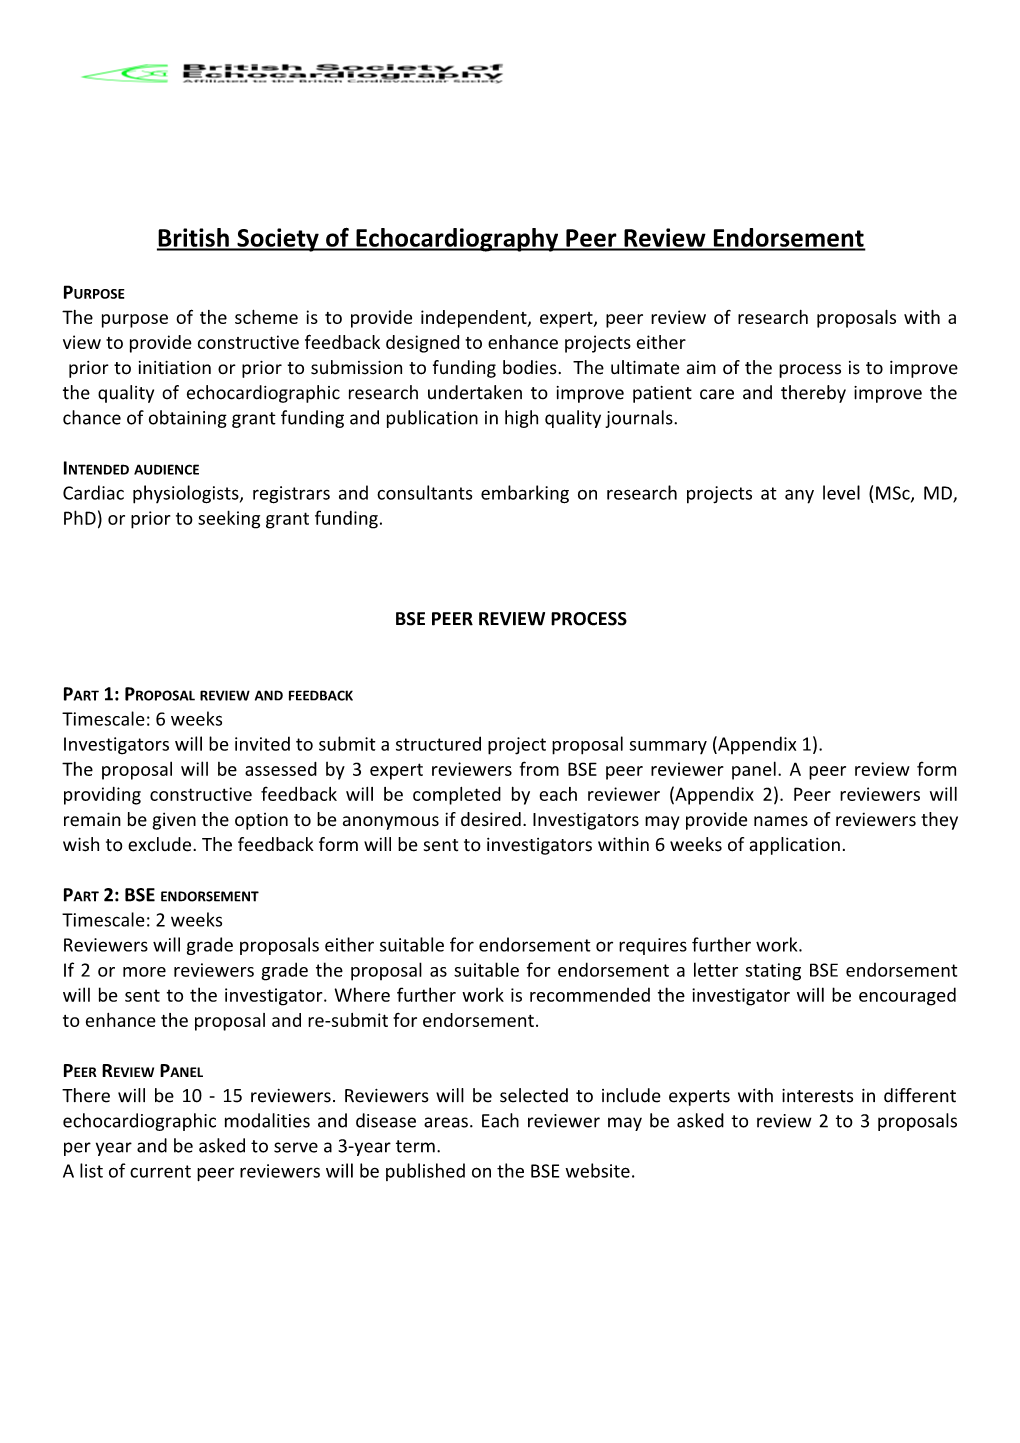 British Society of Echocardiography Peer Review Endorsement